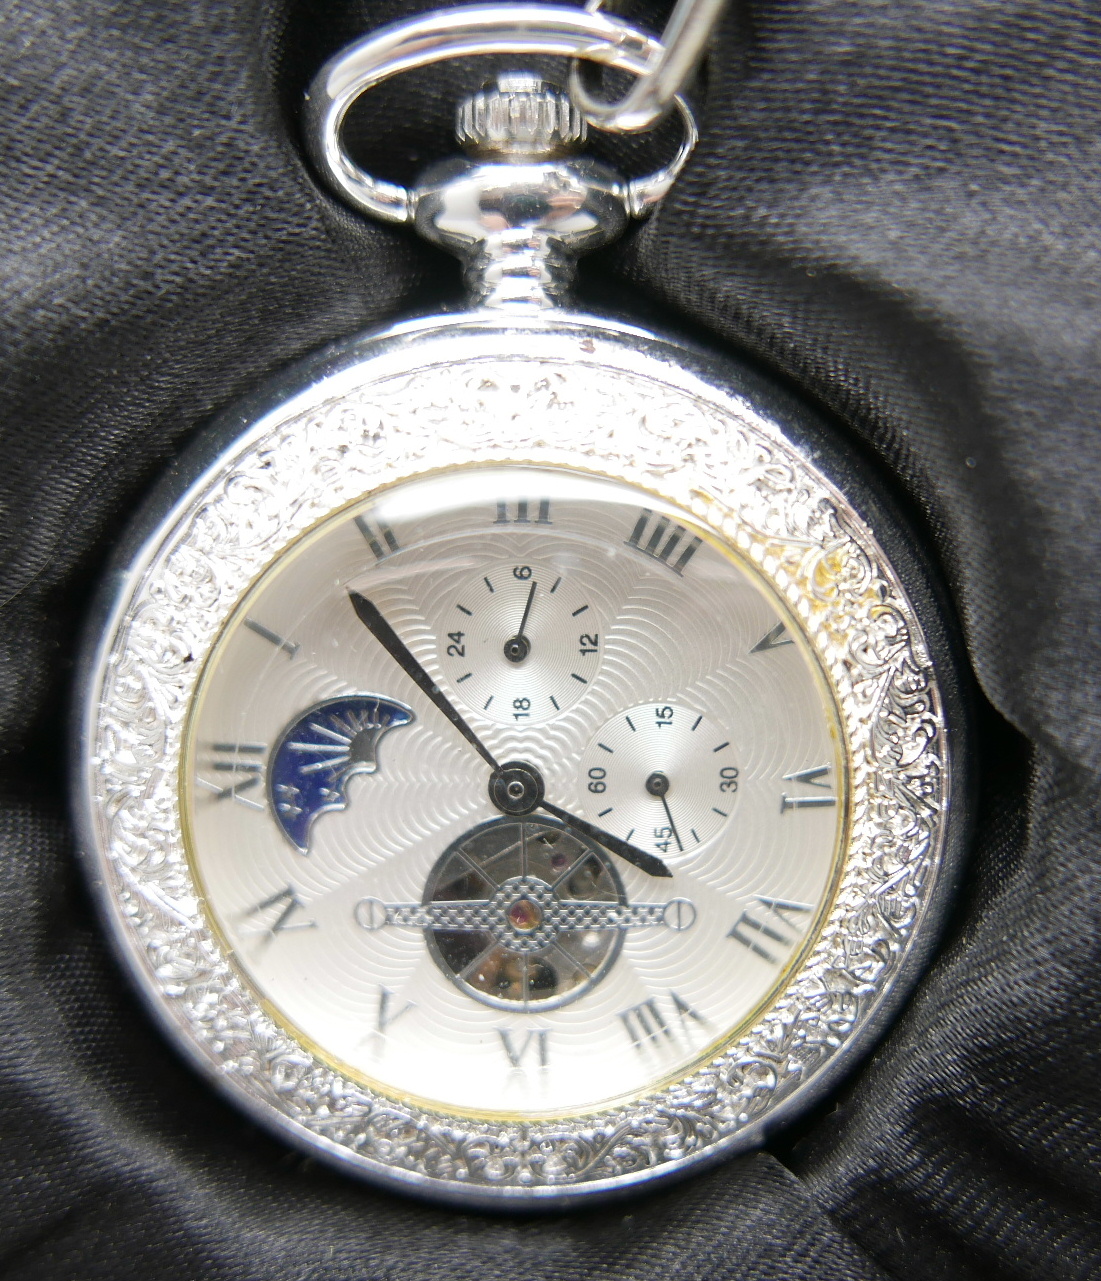 Thirty-five Atlas pocket watches including Heritage, Stobart, Glory of Steam and display case - Image 4 of 10